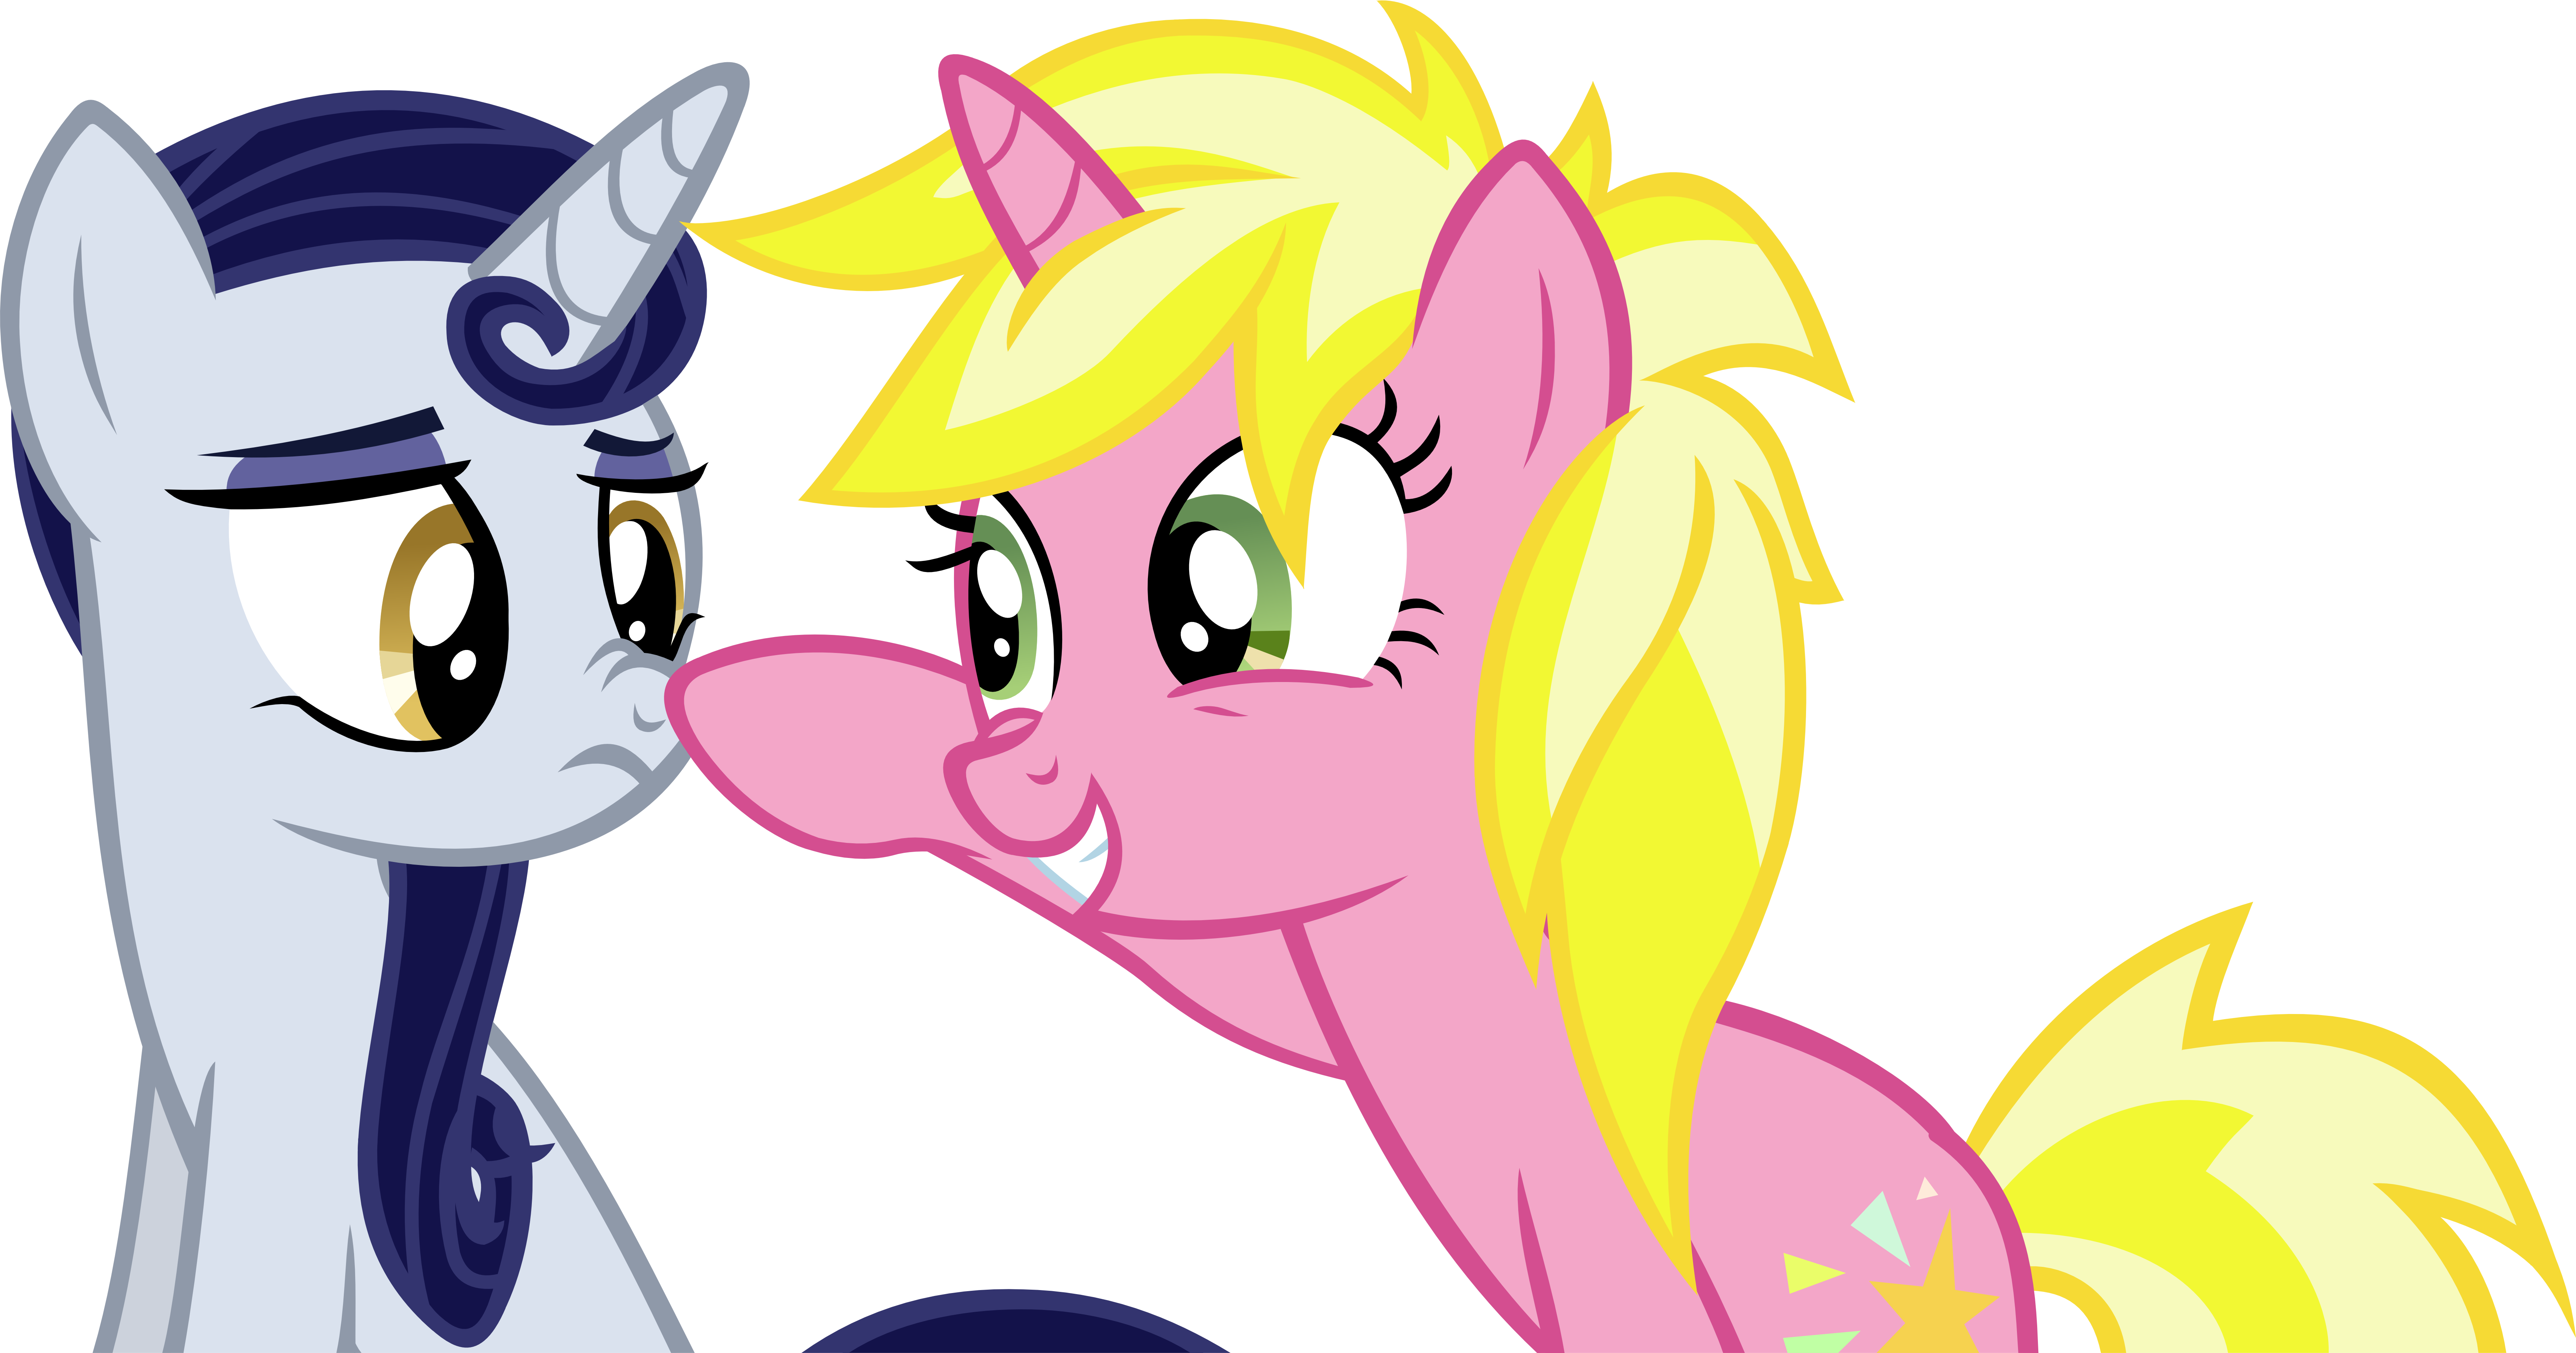 sisterly_nose_boop_by_ironm17-db338fw.pn